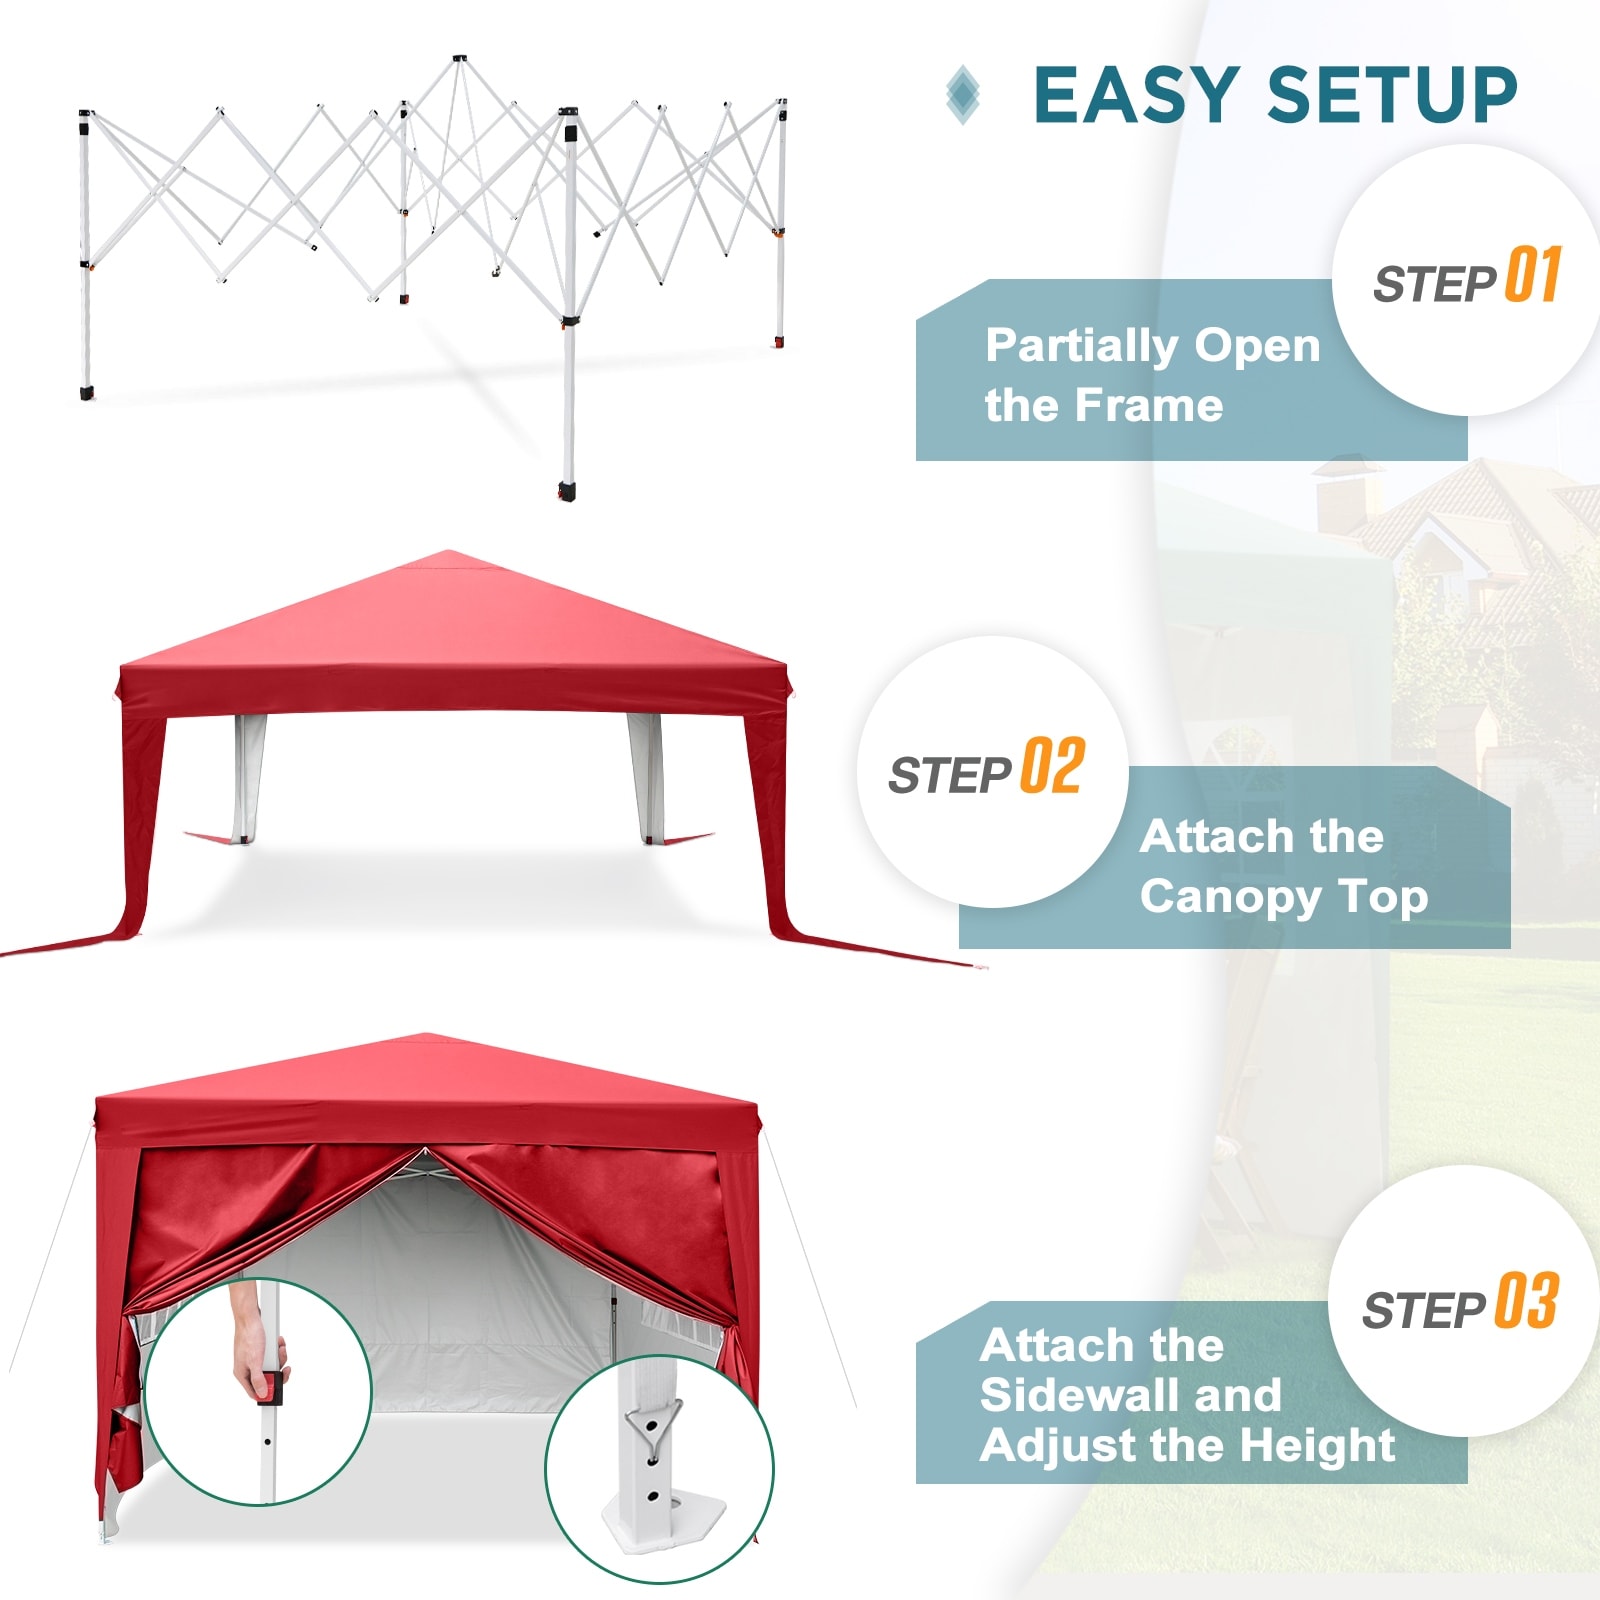 EAGLE PEAK 10x10 Pop Up Canopy Tent with 4 Side Walls, Easy Set up Shelter with 100 Square Feet of Shade